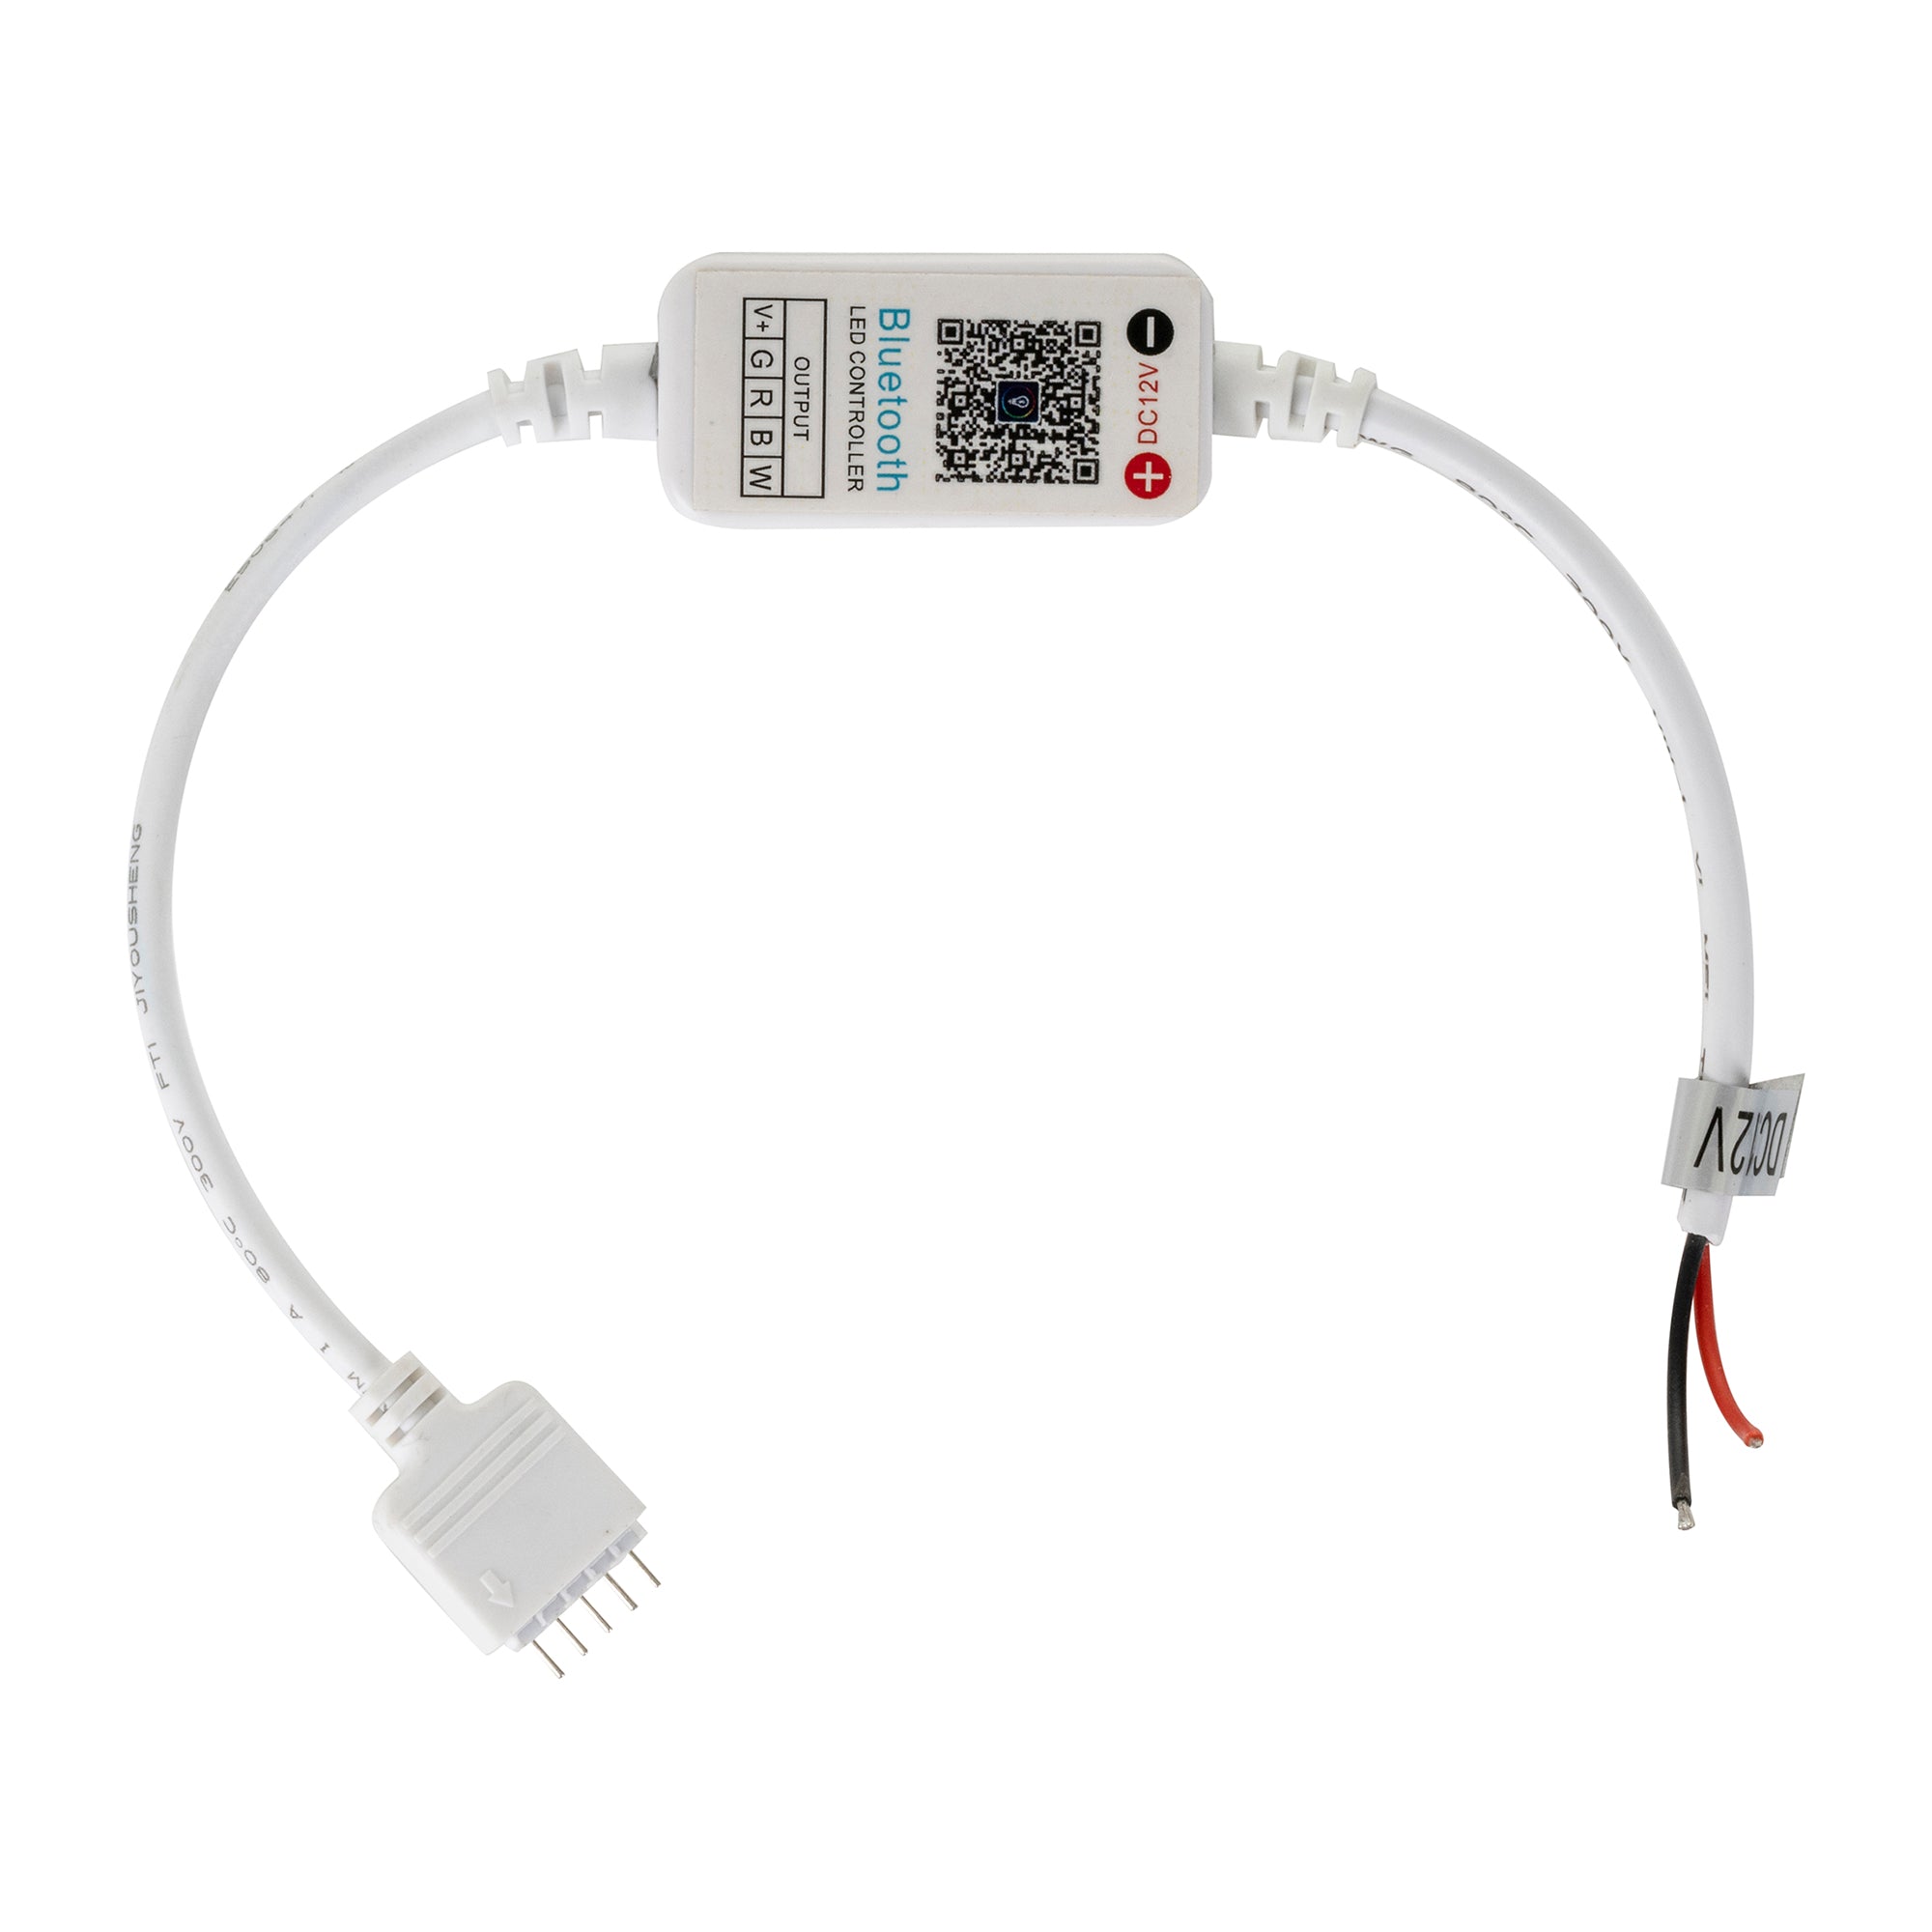 HV9601 - RGBW controller to suit Halo RGBW Wall Lights